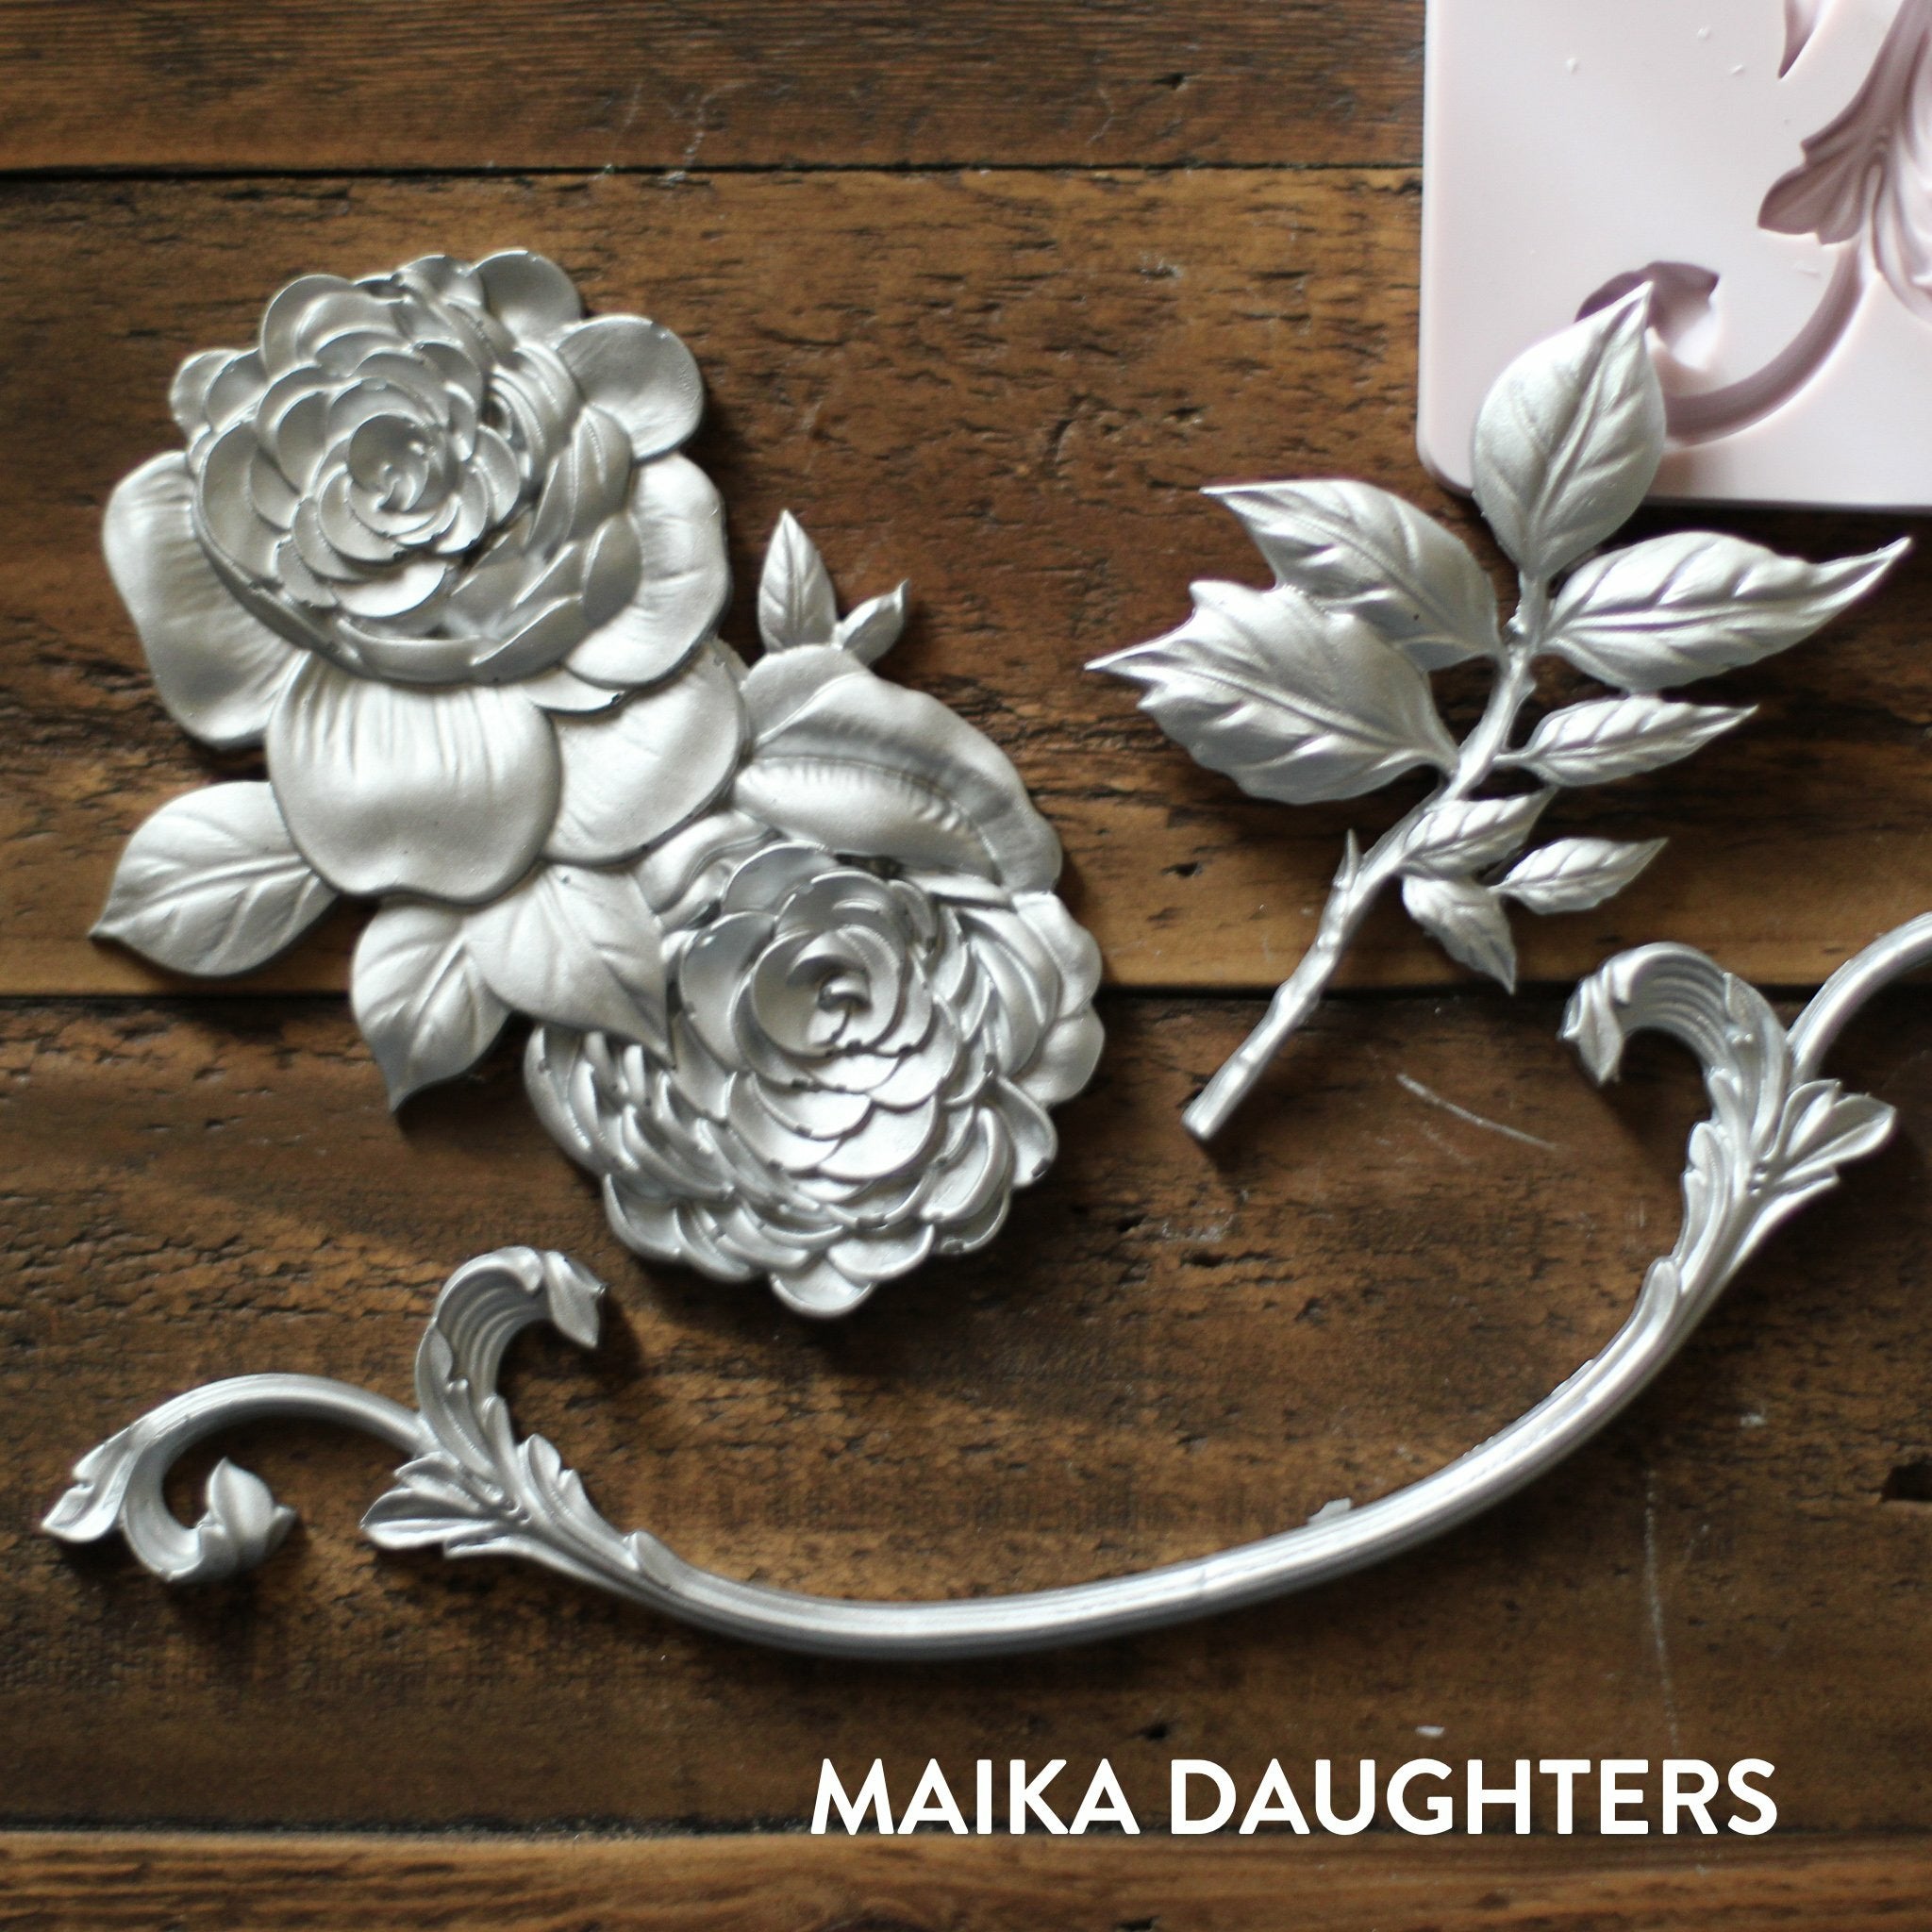 Wooden background with castings of the Victorian rose mold in silver. A white Maika Daughters logo is in the bottom right corner